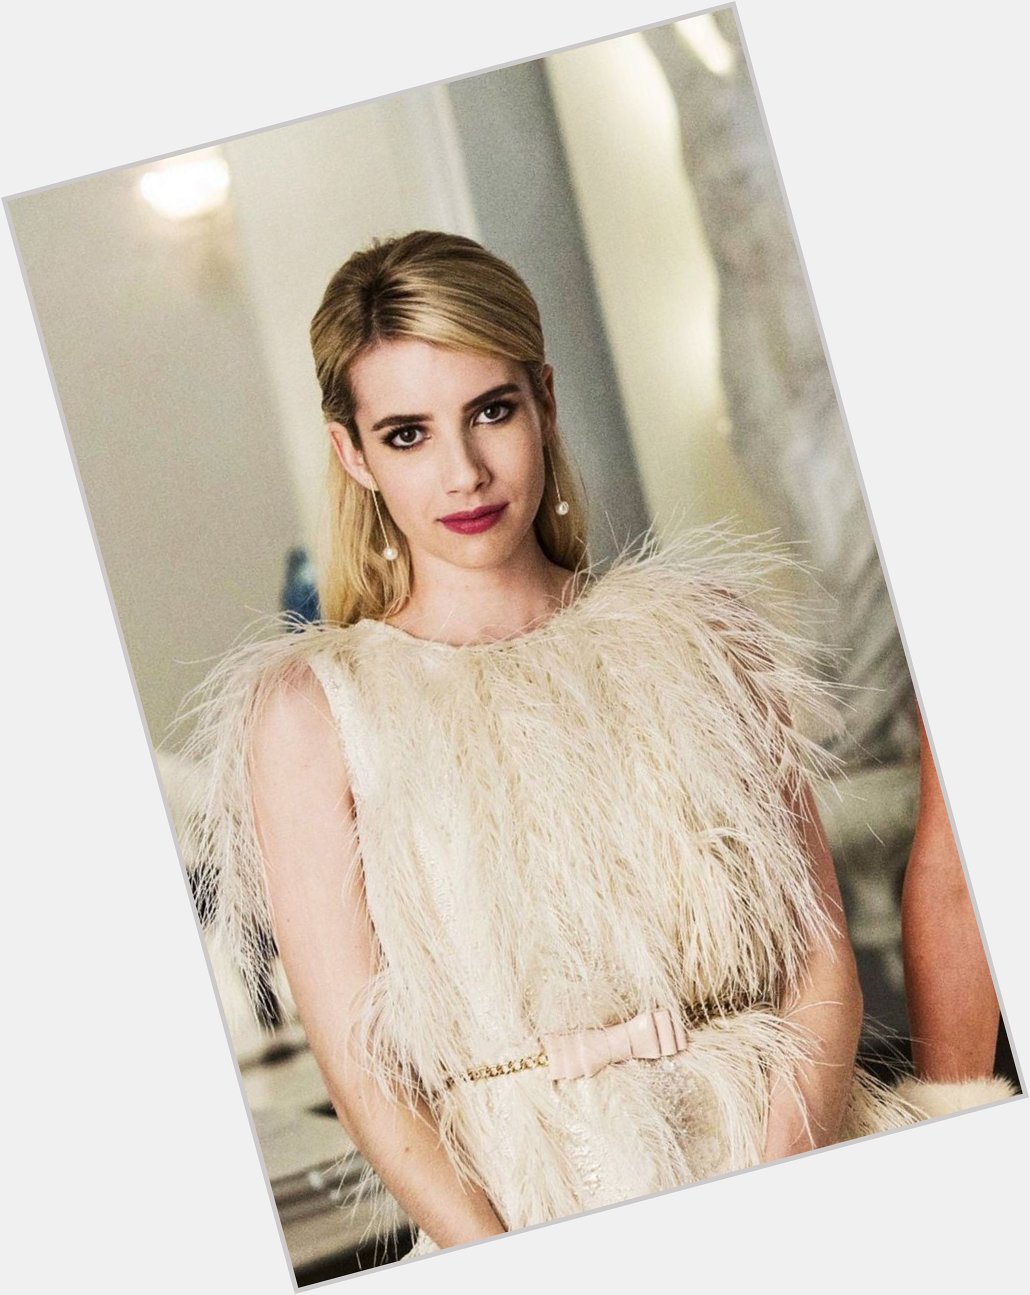 Timelessbae: Wishing a happy 26th birthday today to Emma Roberts! 